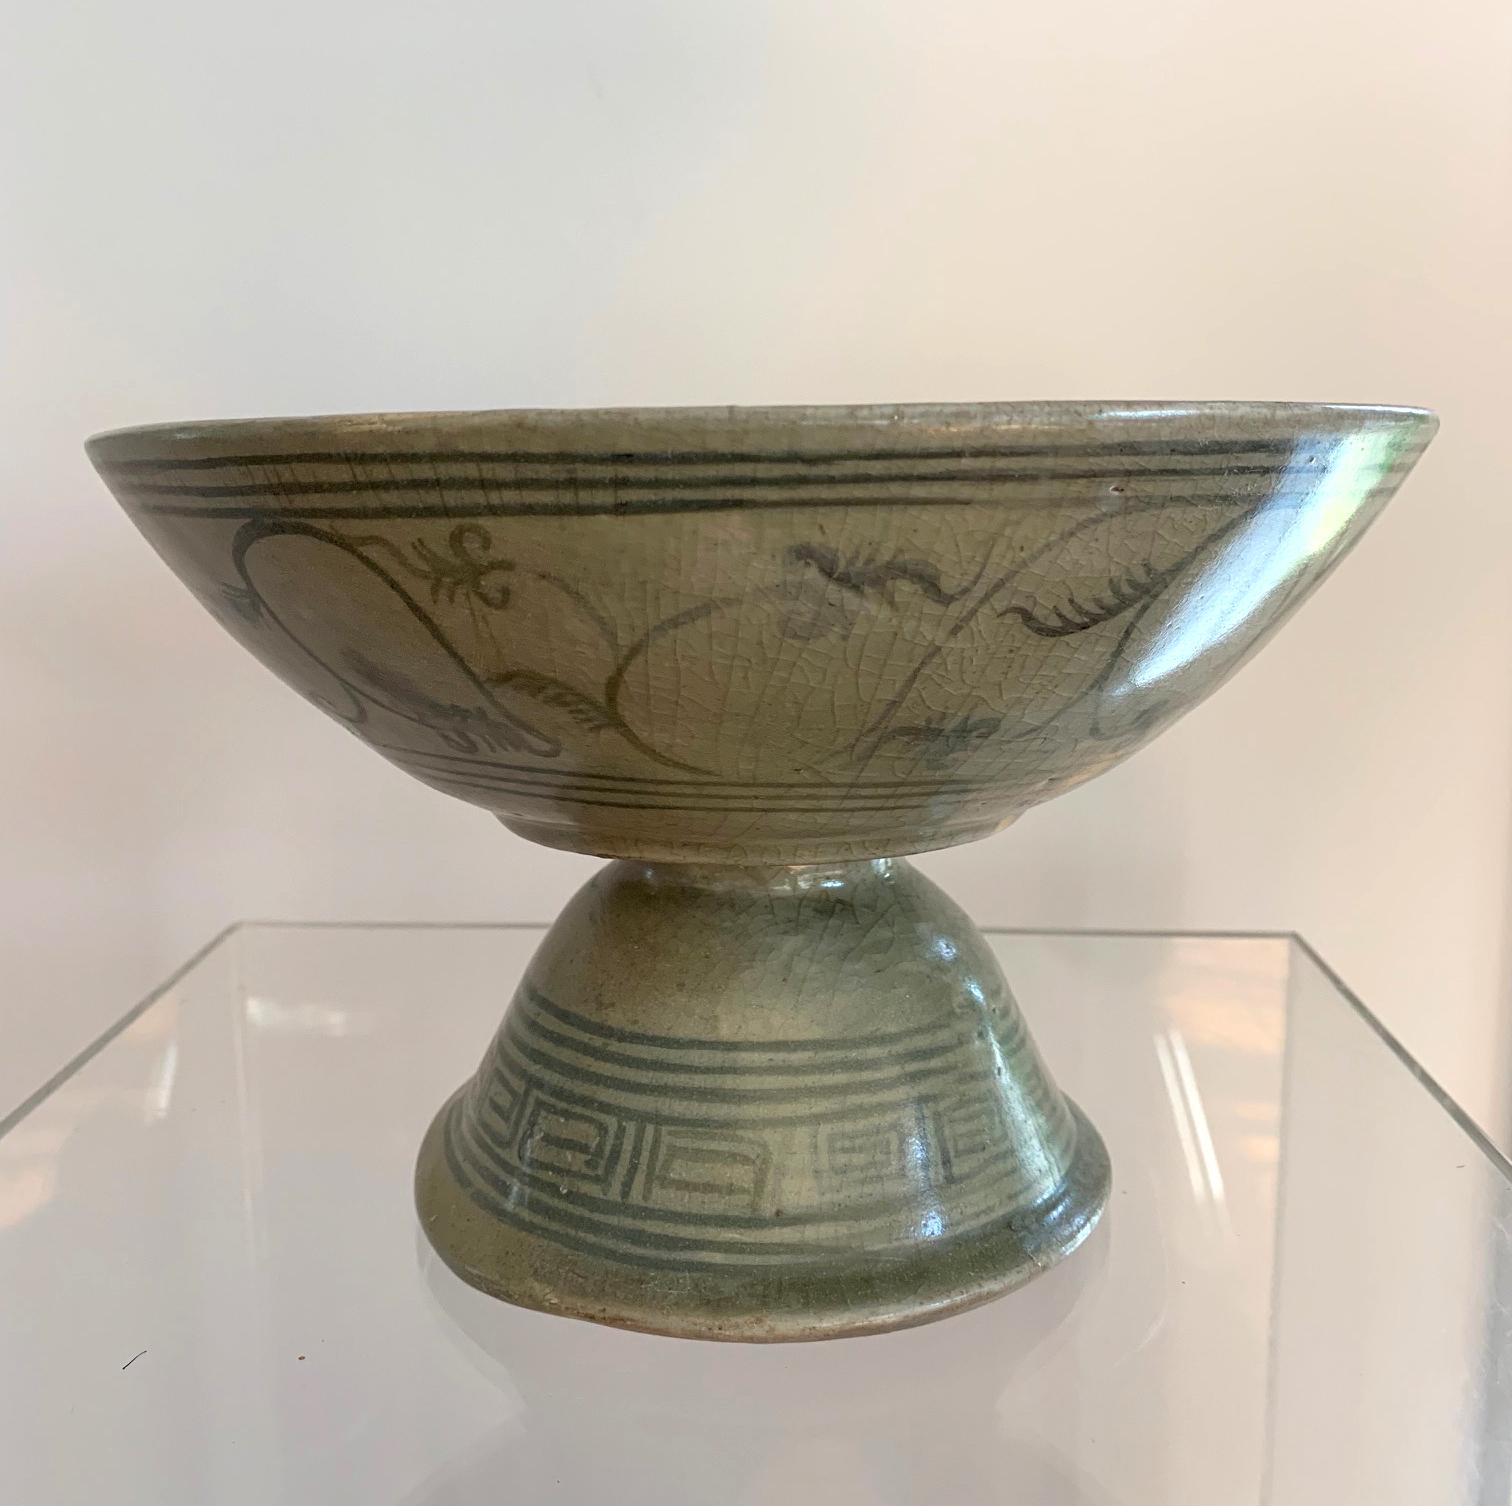 A celadon stemmed dish with underglaze deep blue decoration from Sukhothai (a former Kingdom in nowadays central Thailand) circa 14th-16th century. The pedestal dish was a typical ceramic output from Sawankhalok region, likely one of the kilns in